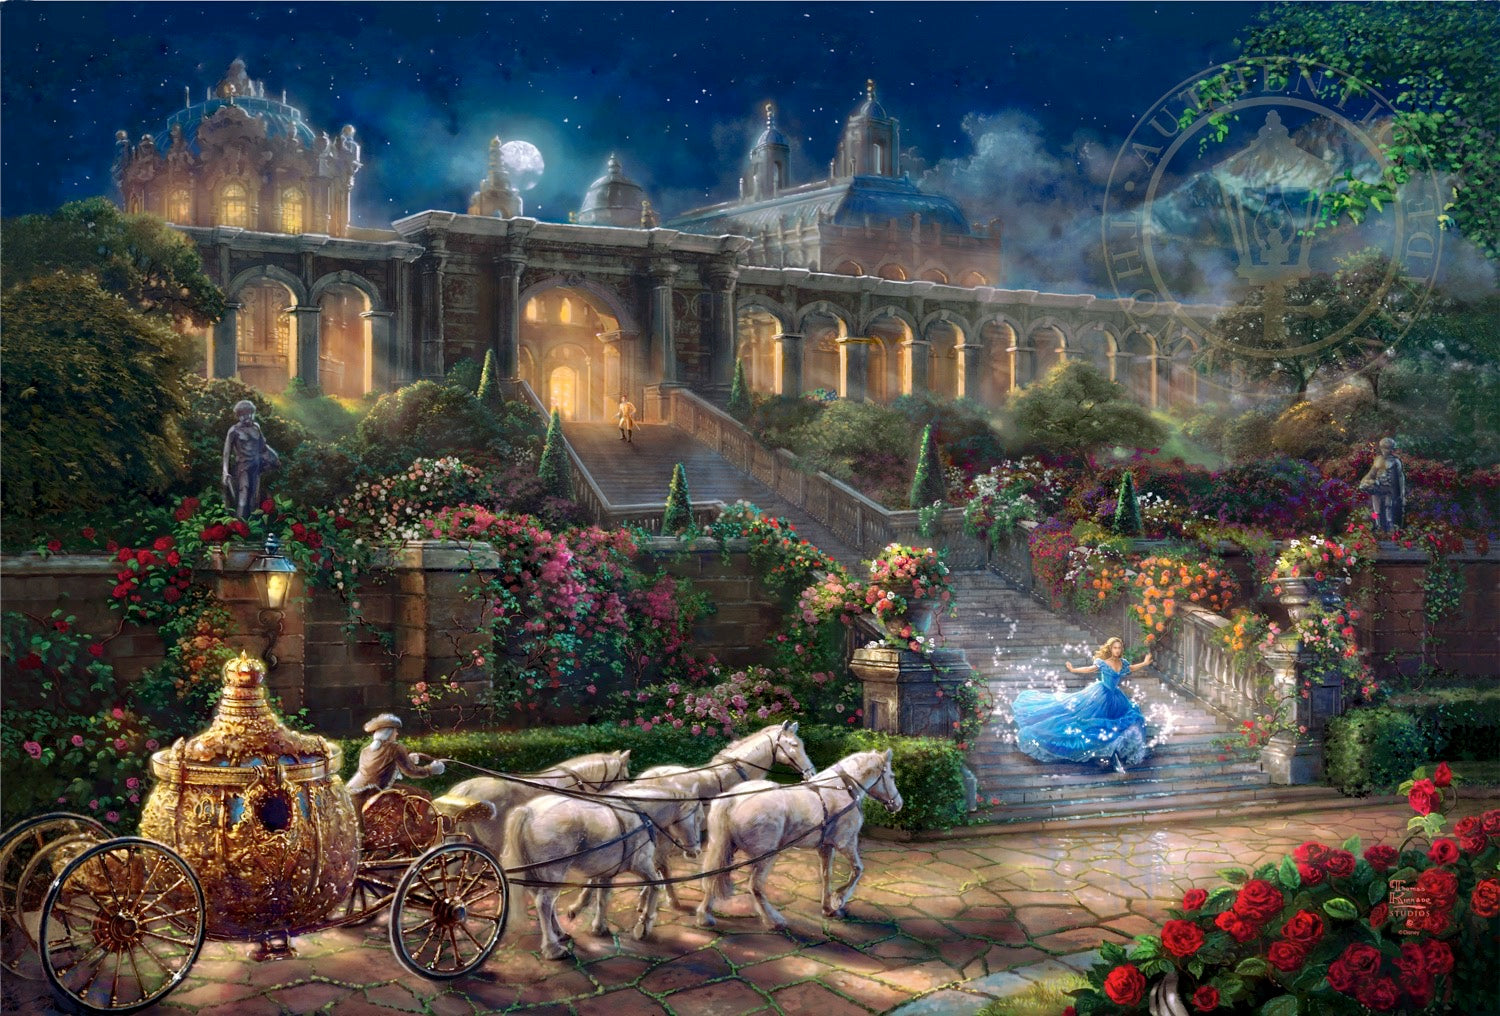 Cinderella, racing down the castle's stairs, as the clock strikes midnight. - as her magical  carriage awaits.